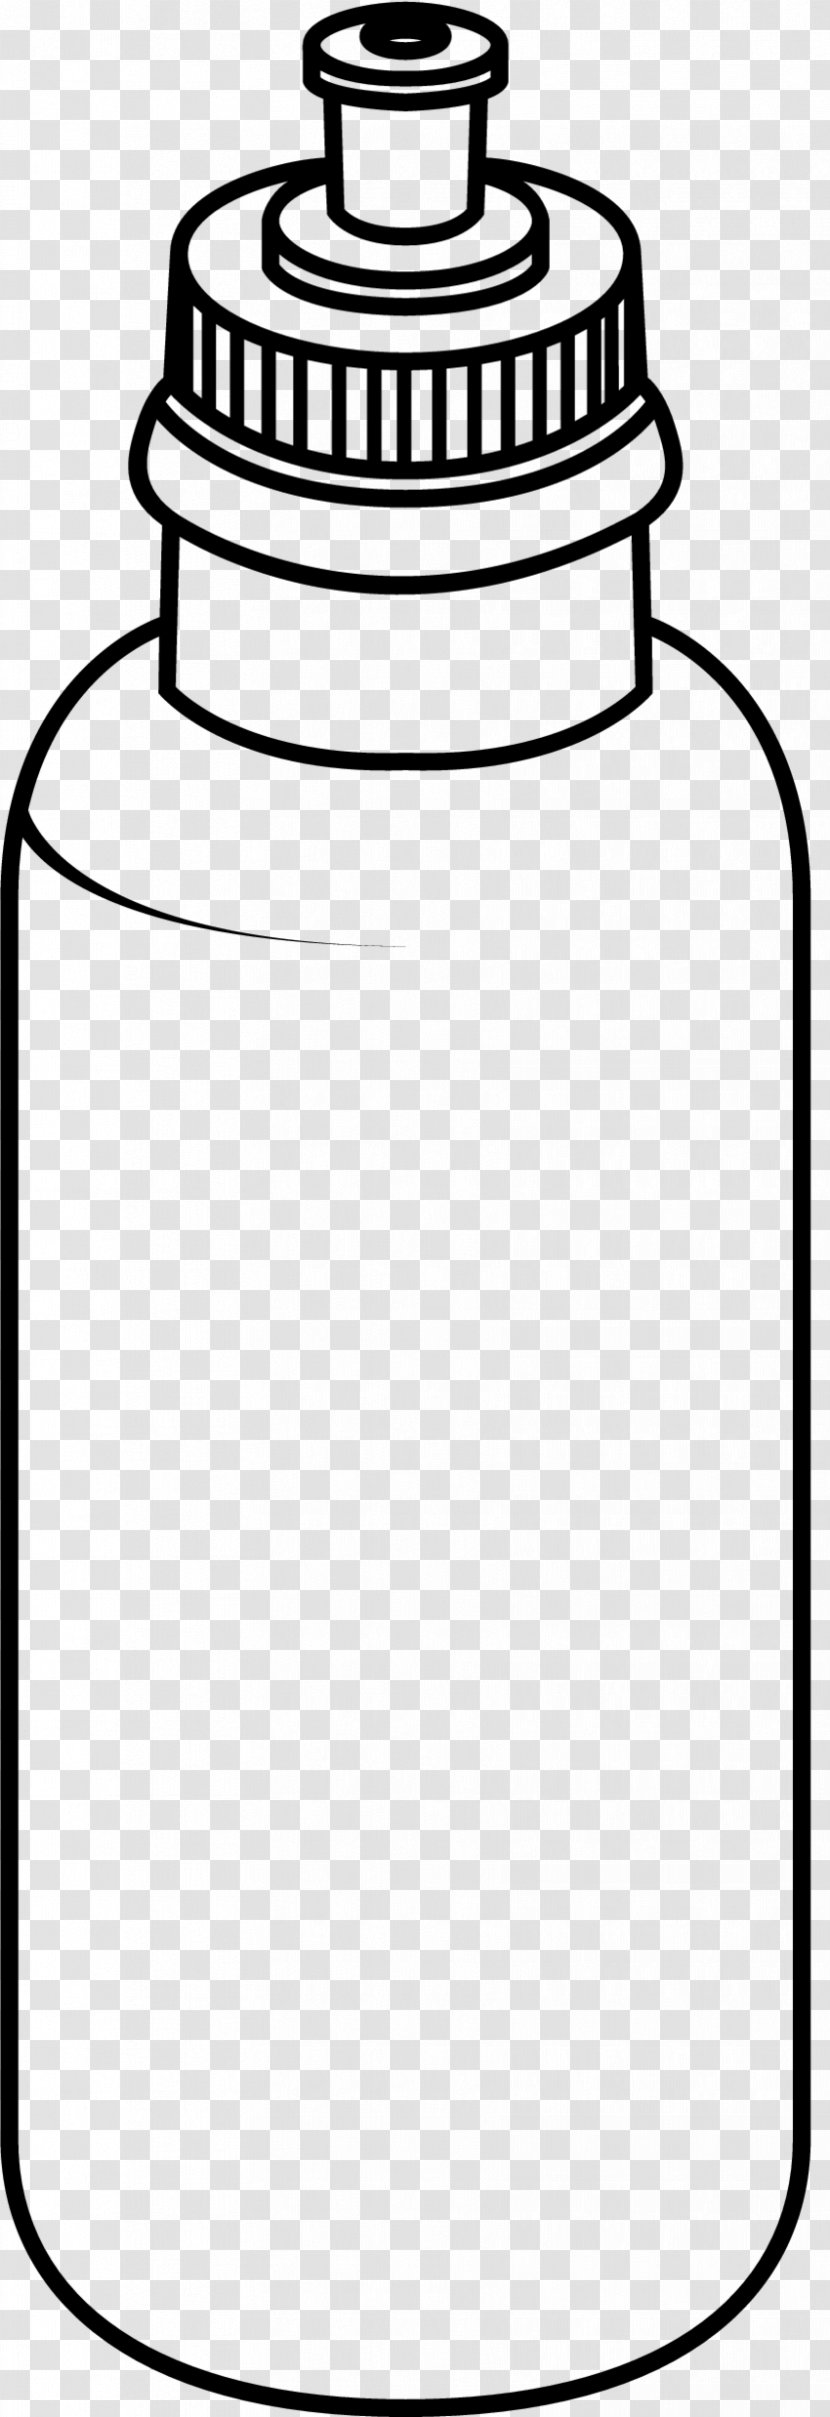 Food Storage Containers Clip Art - Drinkware - Drinks Transparent PNG